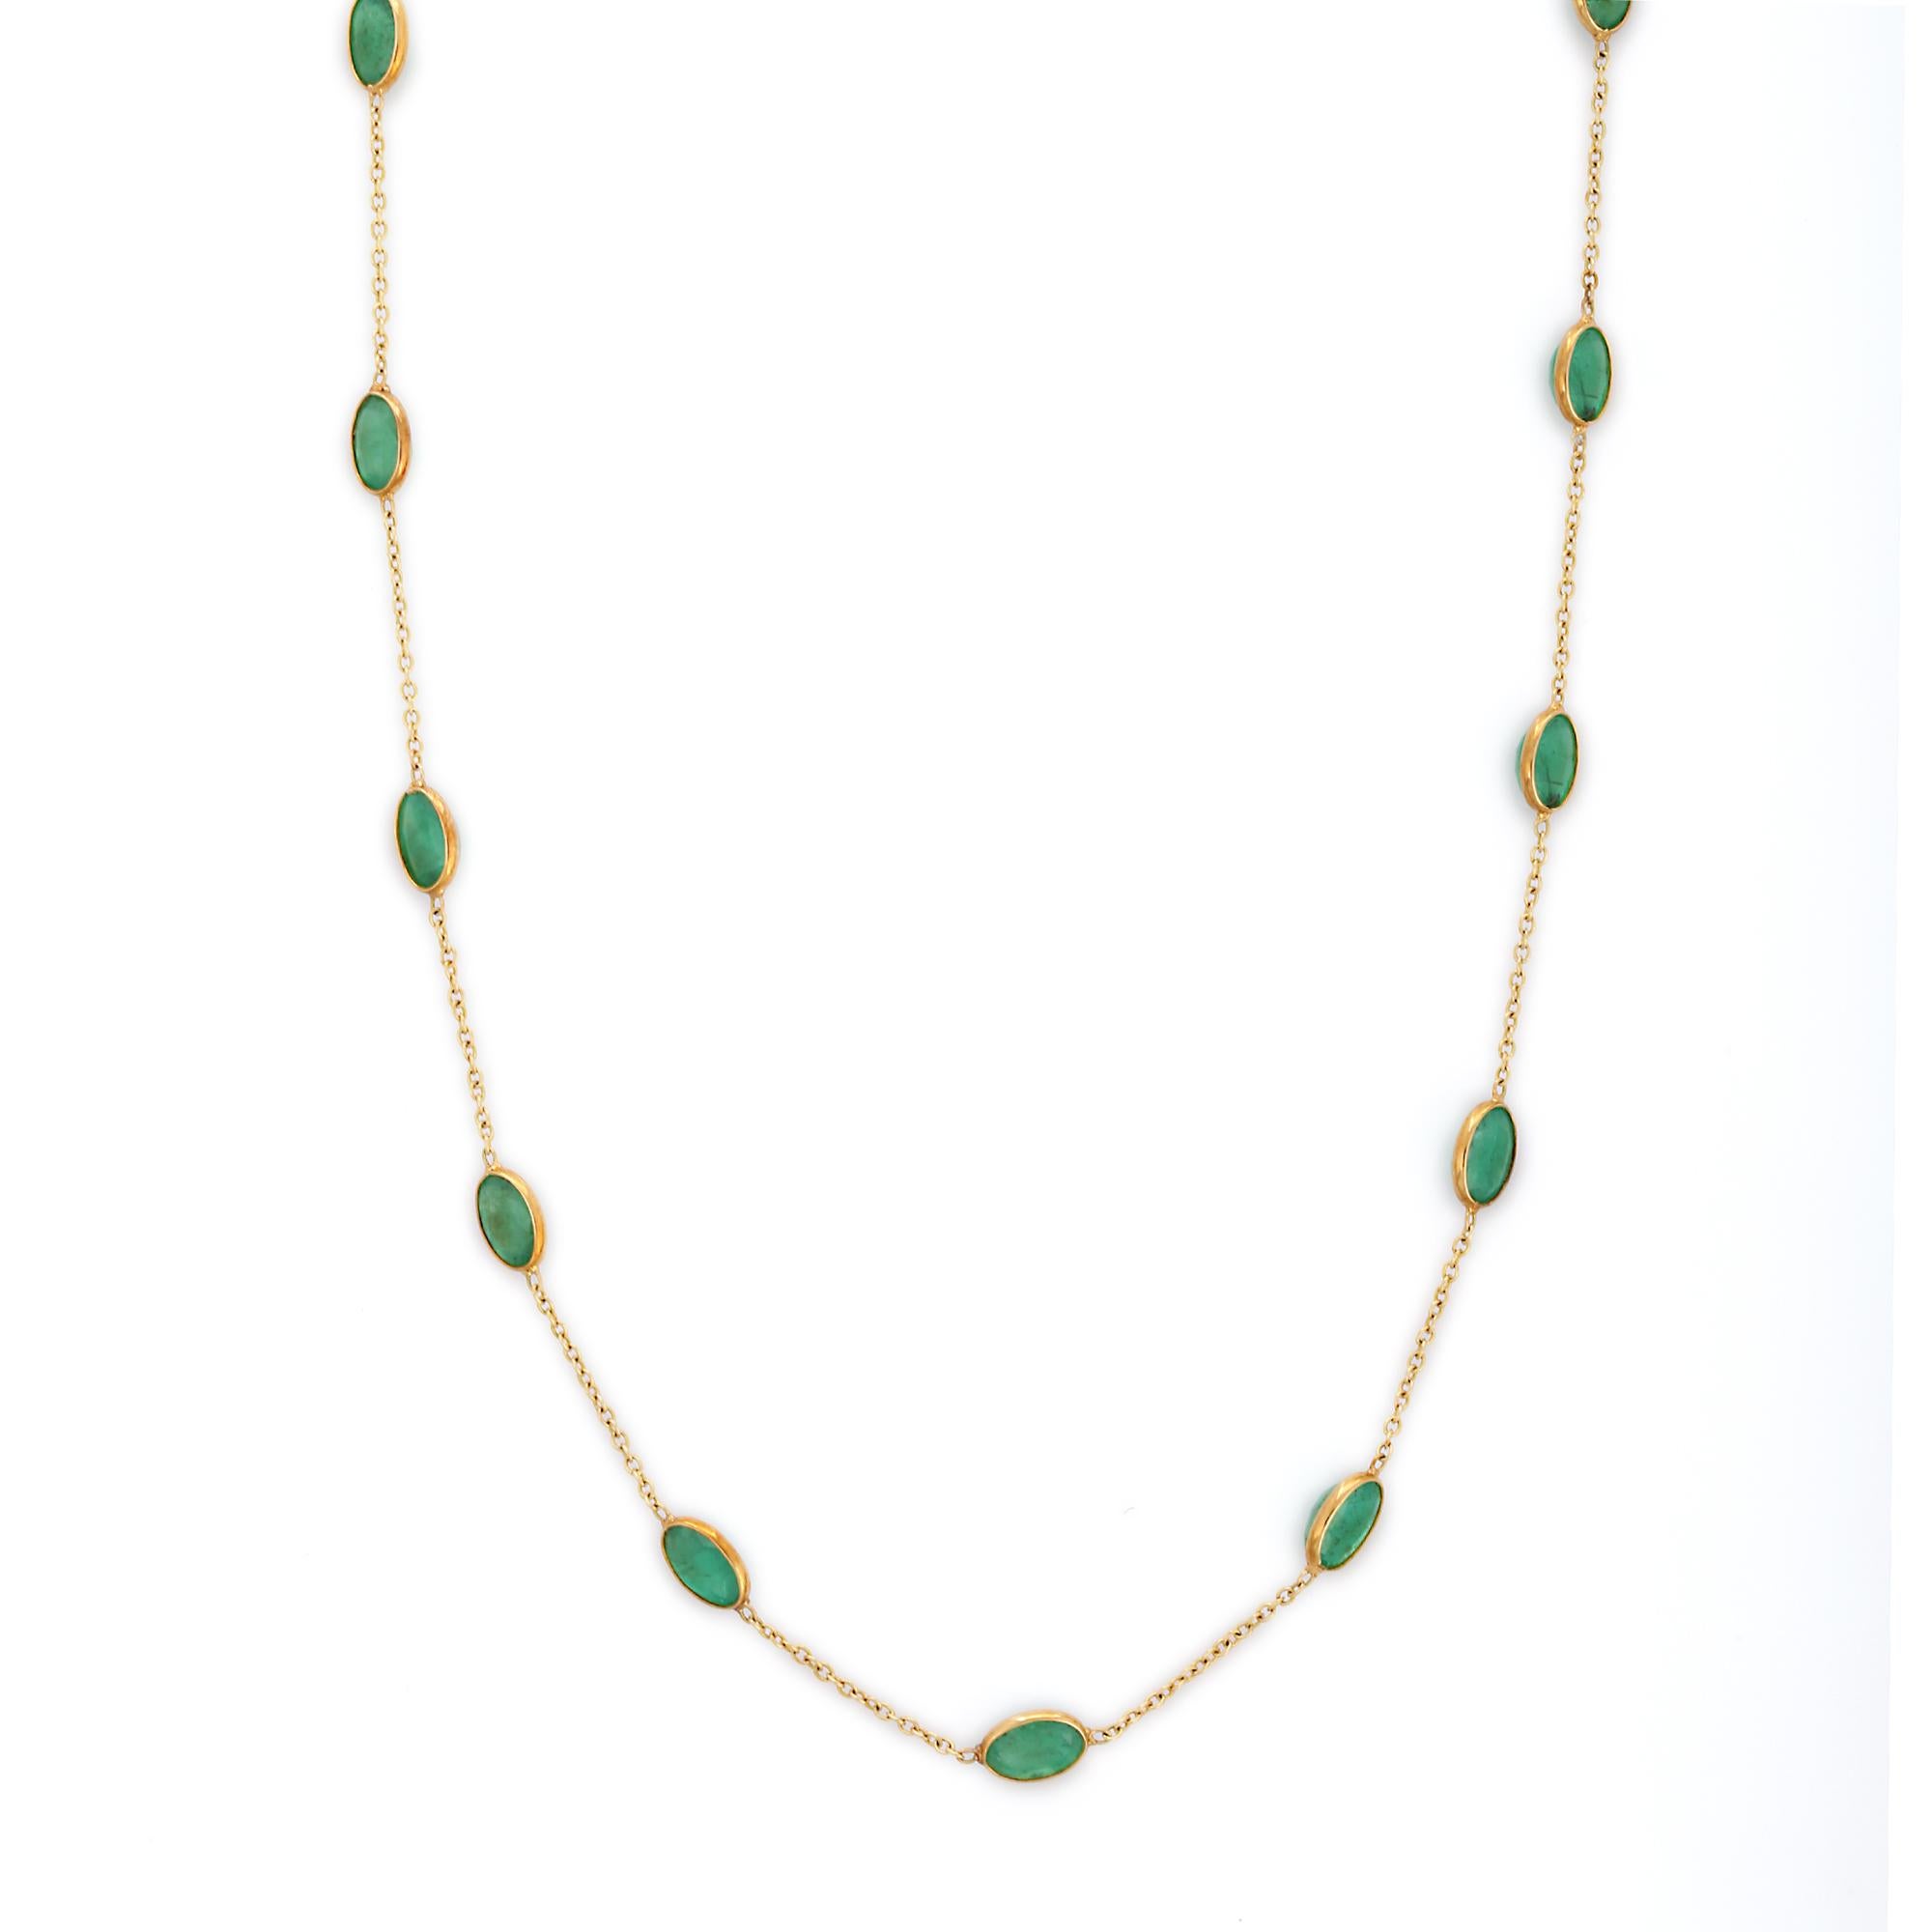 Emerald Chain Necklace in 18K Gold studded with oval cut emerald gemstones. Lightweight and gorgeous, this is a great bridesmaid, wedding or christmas gift for anyone on your list.
Accessorize your look with this elegant emerald chain necklace. This